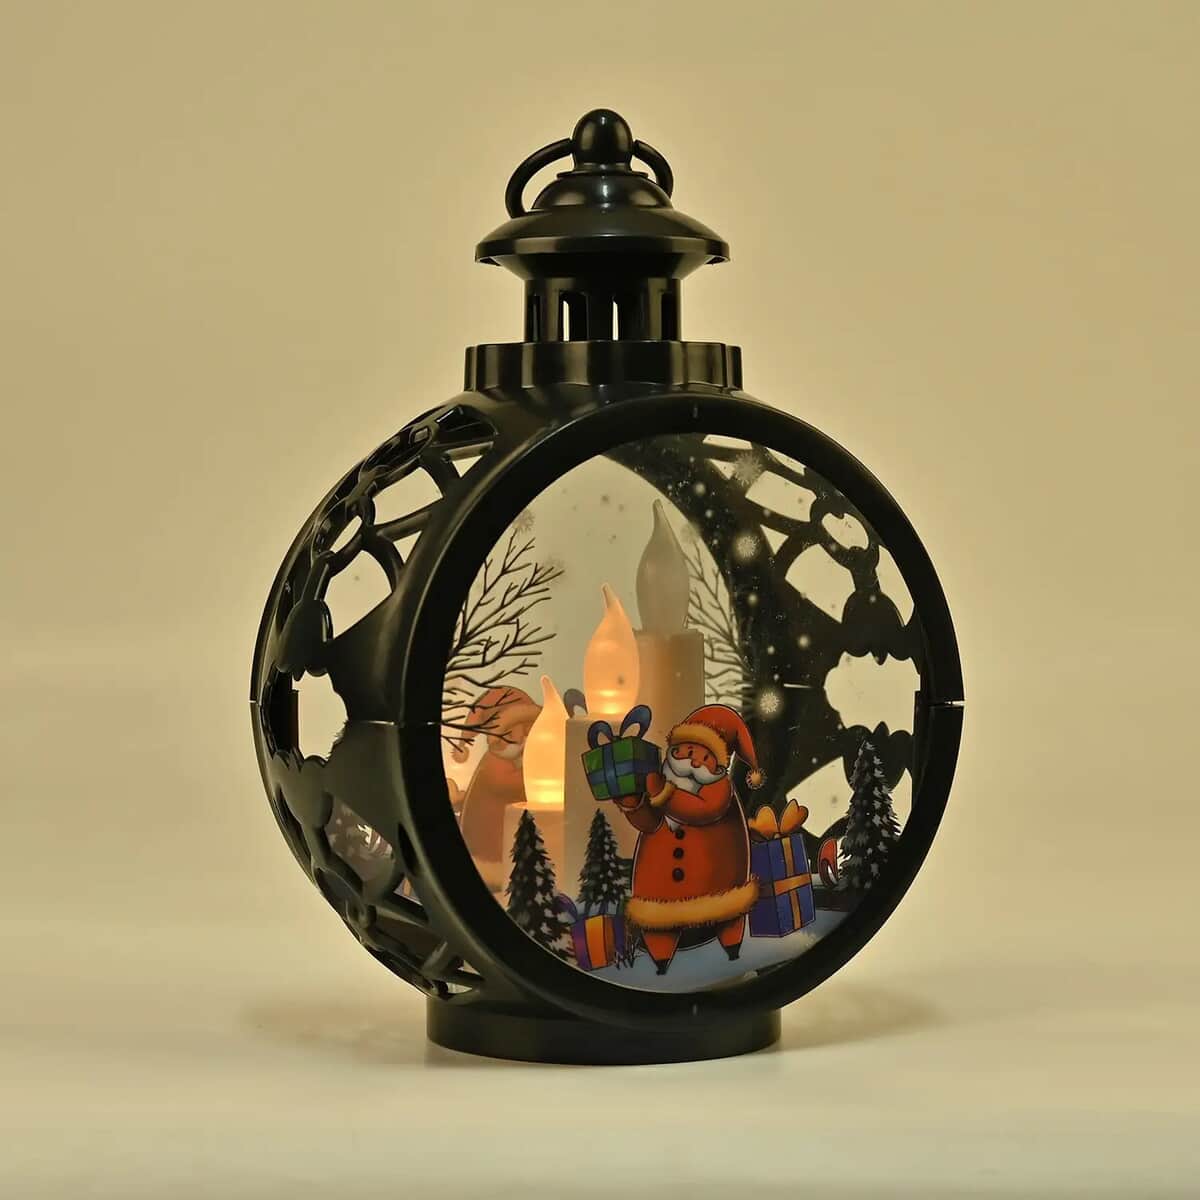 Hanging Lantern Christmas LED Light (3*AAA Batteries Not Included) - Black image number 2